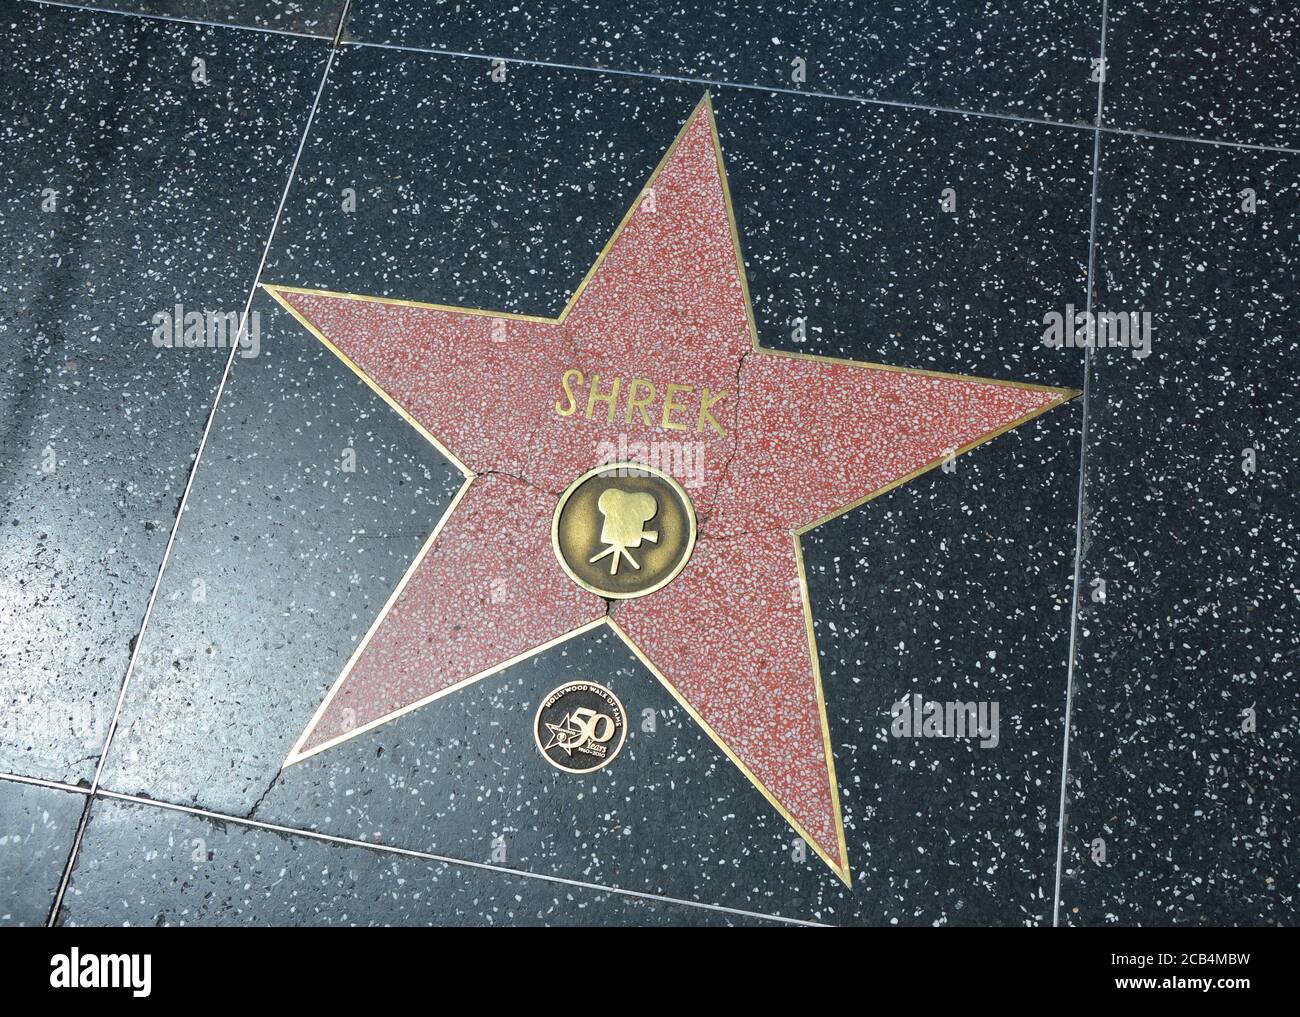 LOS ANGELES, CA, USA - MARCH 27, 2018 : The Hollywood Walk of Fame stars in Los Angeles. Shrek star. Stock Photo